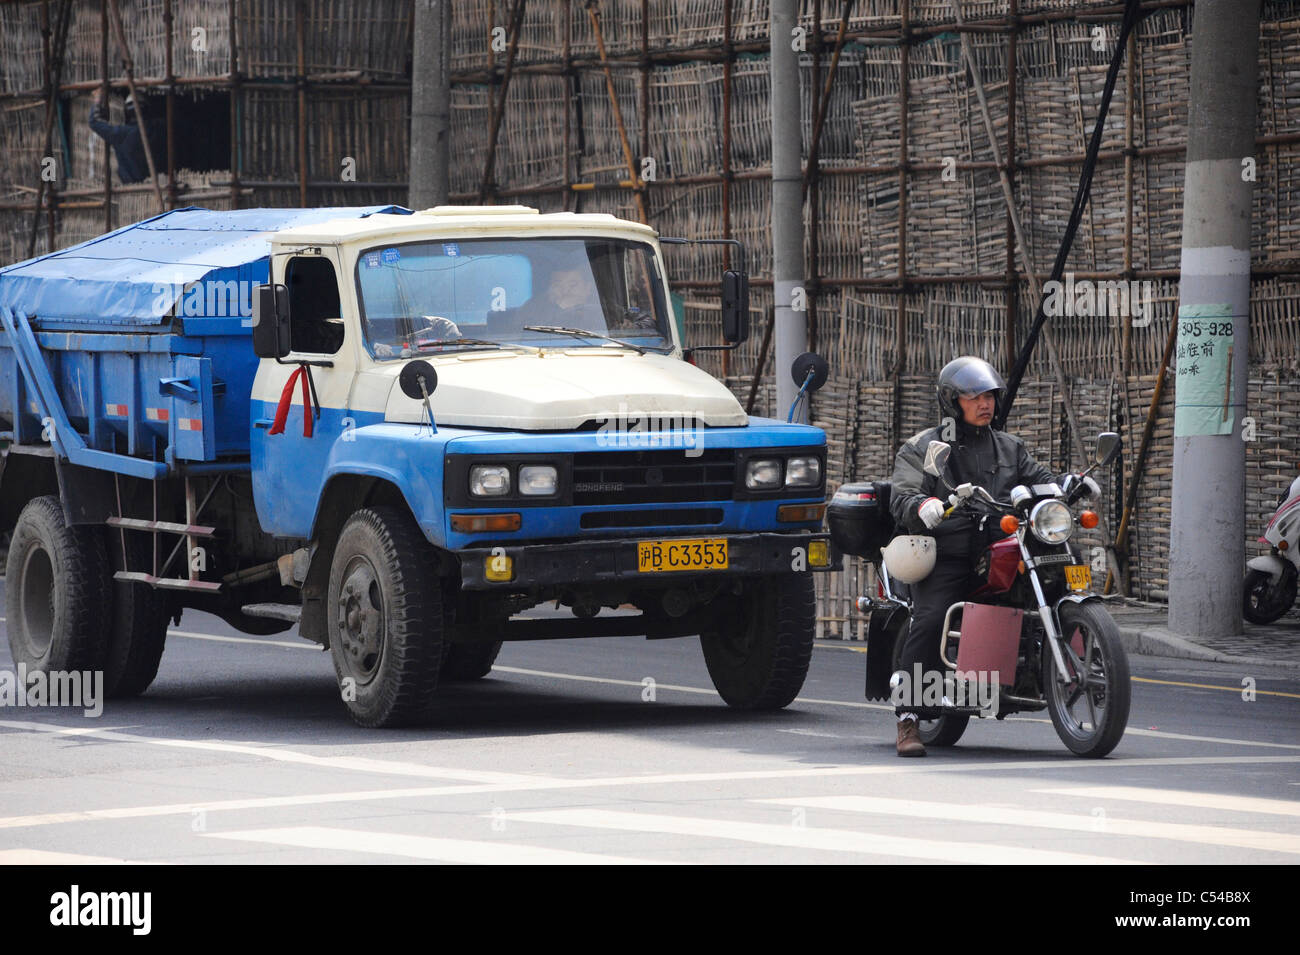 A truck and a motorcycle in Shanghai Stock Photo